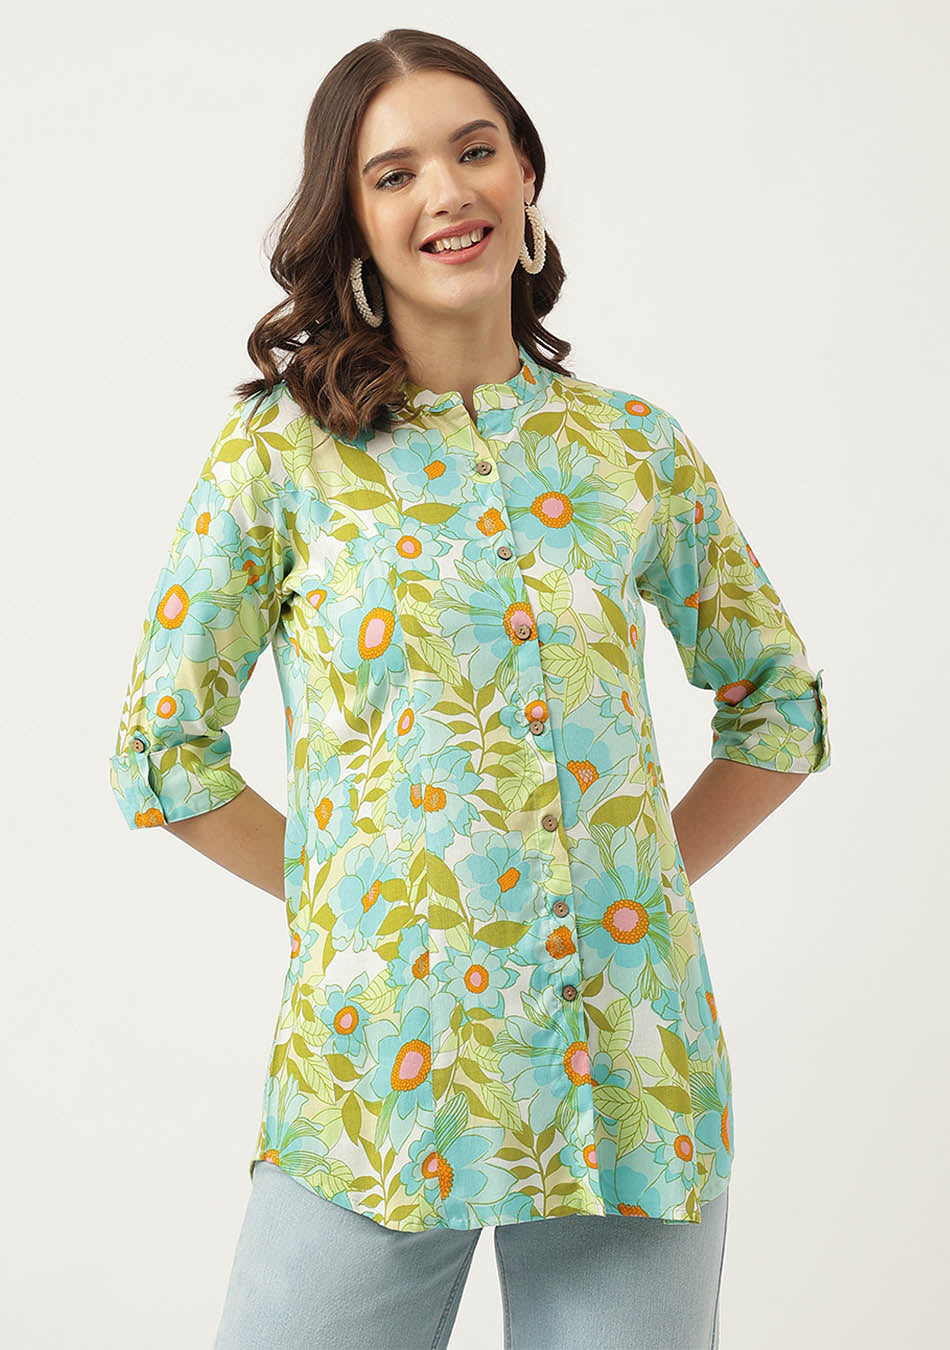 Green Floral Printed Rayon Shirt Style Top